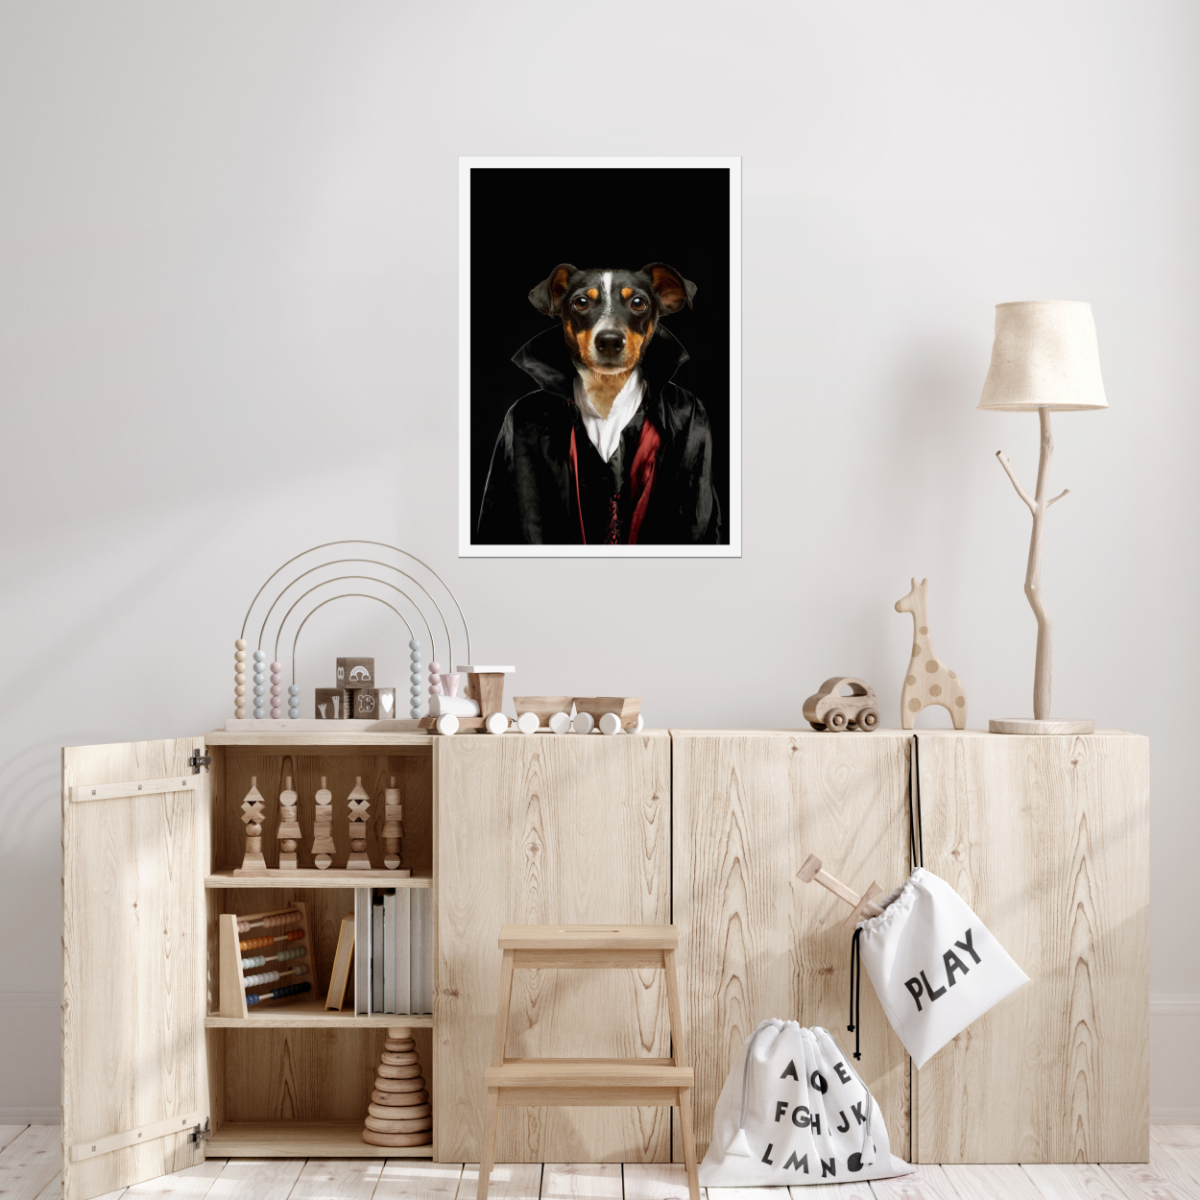 The Vampire: Custom Pet Poster - Paw & Glory - #pet portraits# - #dog portraits# - #pet portraits uk#Paw & Glory, paw and glory, dog drawing from photo, professional pet photos, animal portrait pictures, personalized dog portrait, royal cat portrait, in home pet photography, pet portraits